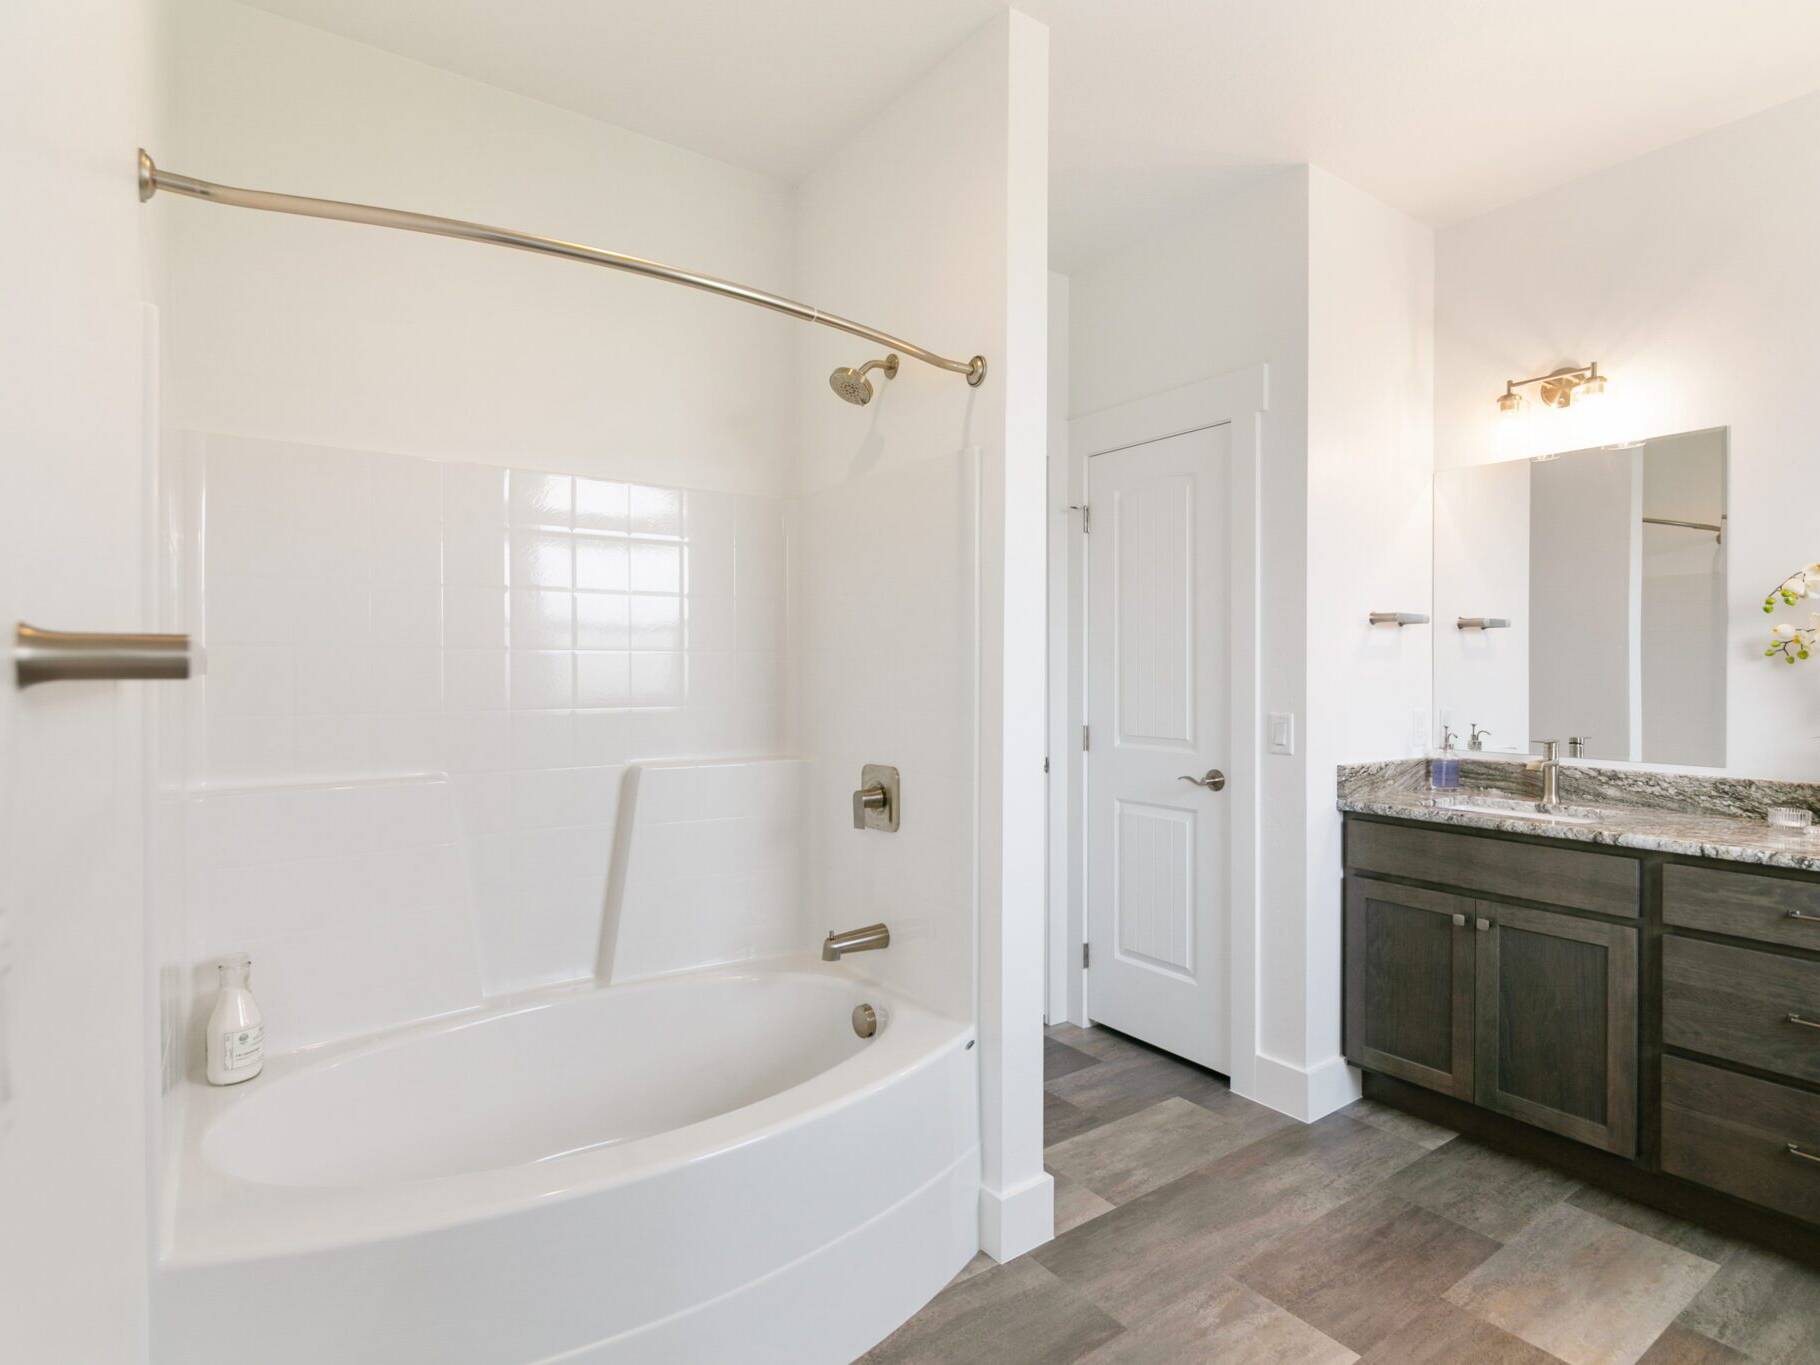 Master Bathroom in The Seeley model home - Built by Big Sky Builder in Hamilton, MT